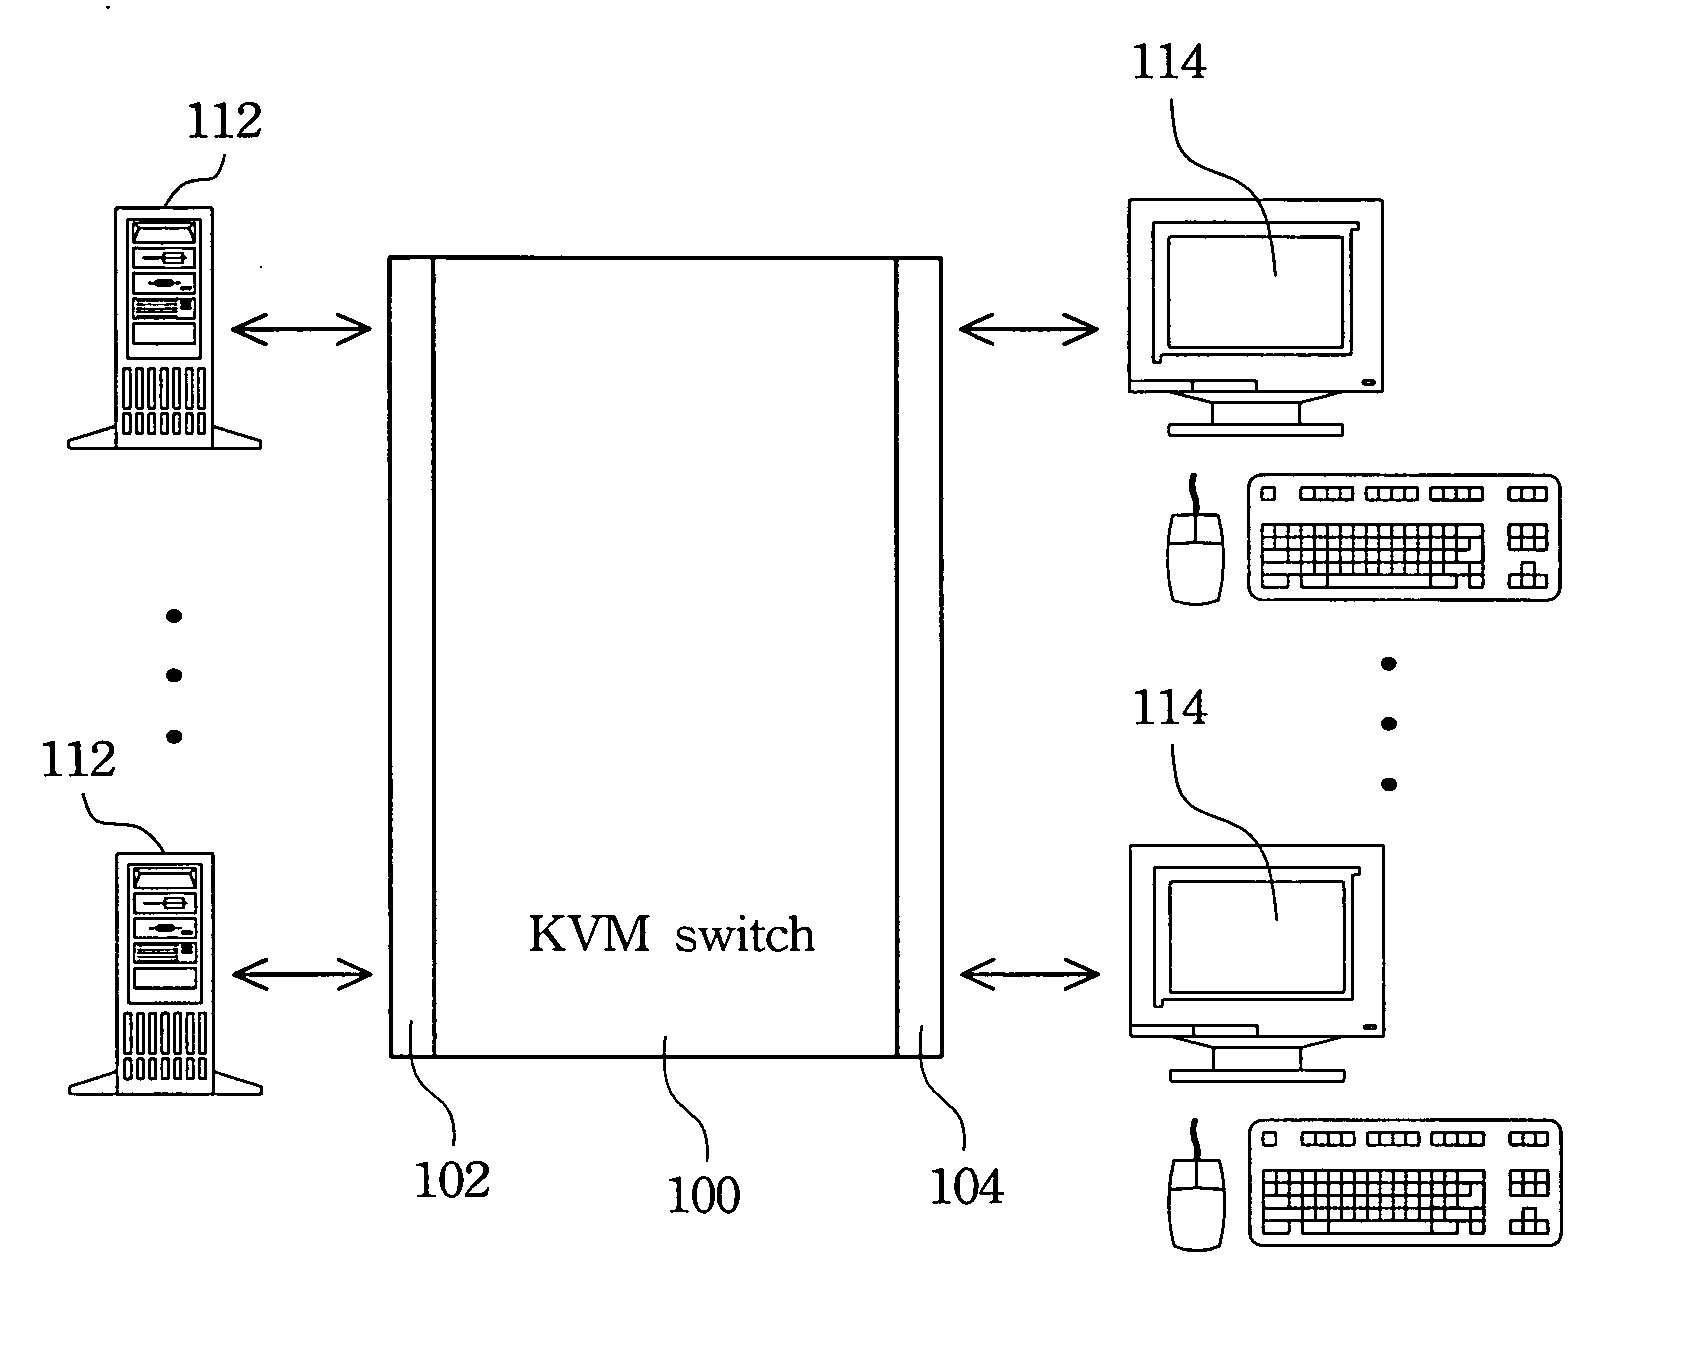 Keyboard-mouse-video switch with a digital visual interface